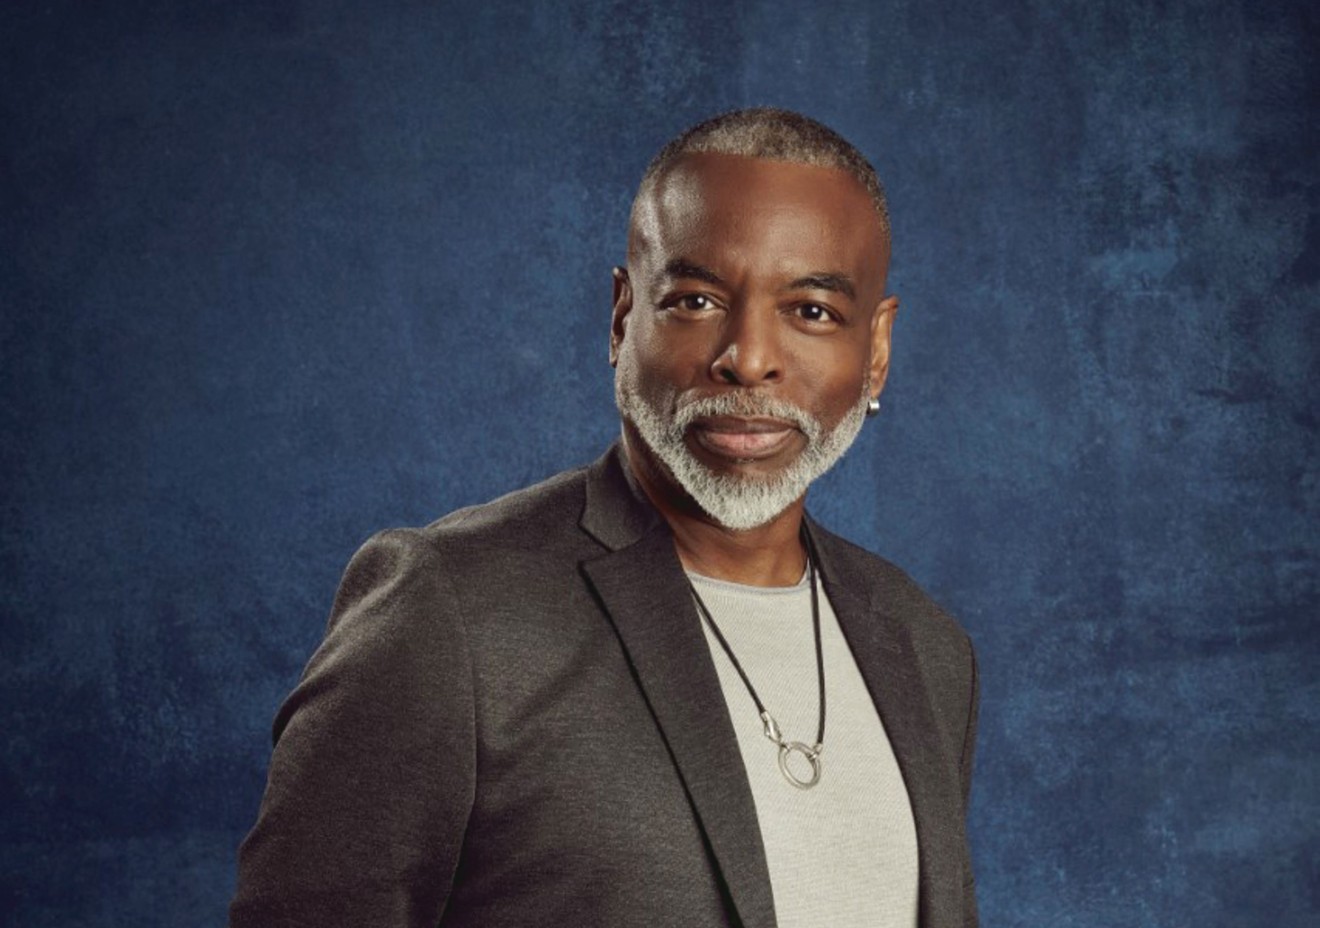 TV host, actor and literacy advocate LeVar Burton will talk at a live Q&A at UTA.